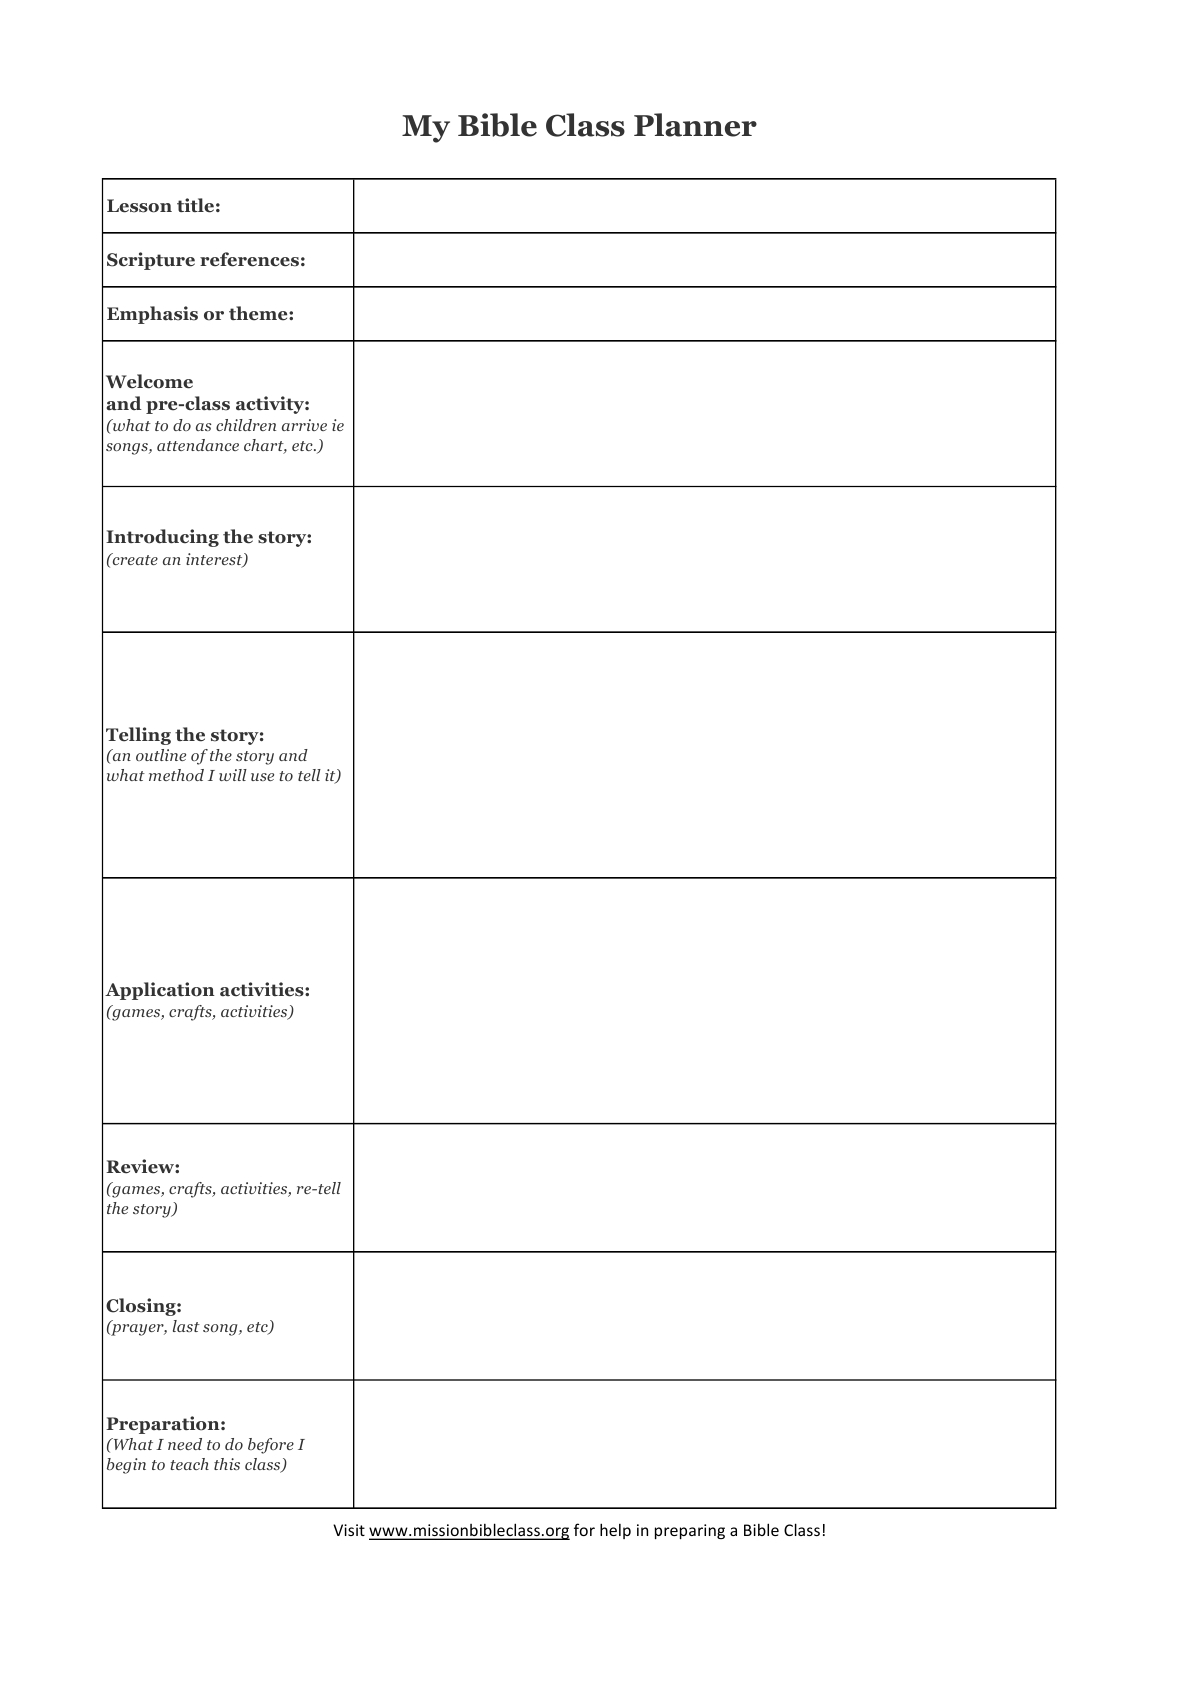 blank-lesson-plan-templates-to-print-mission-bible-class-free